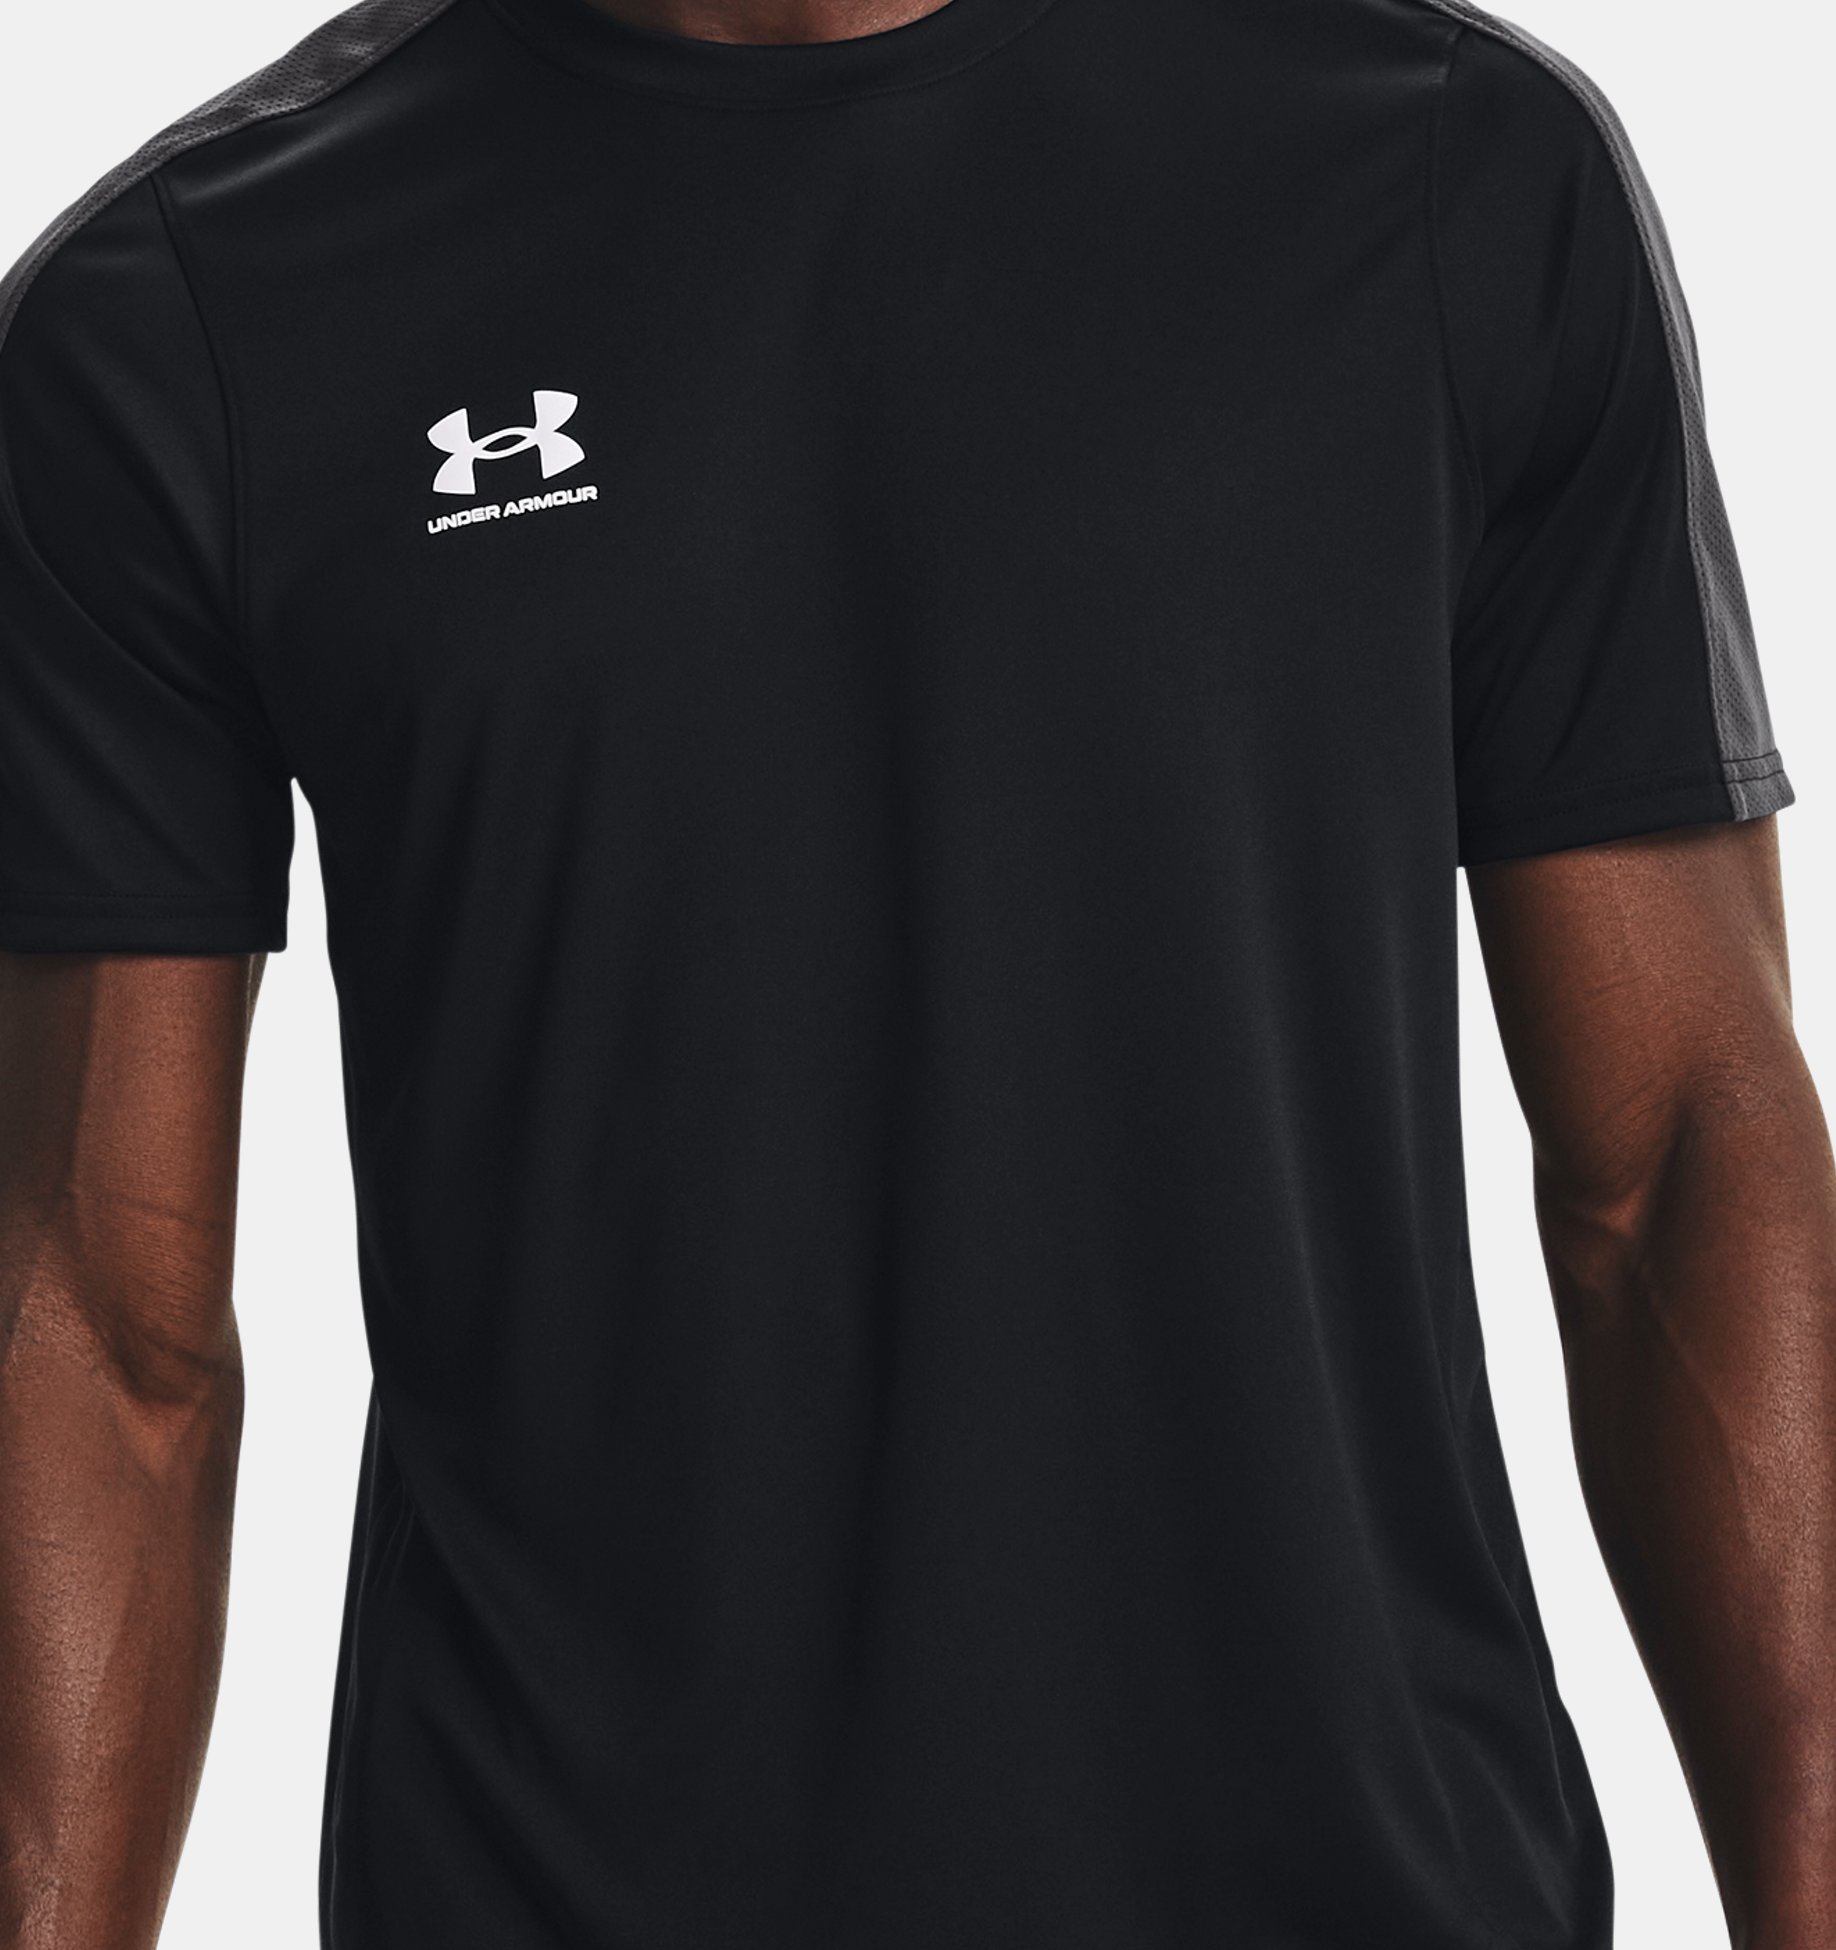 https://underarmour.scene7.com/is/image/Underarmour/V5-1365408-001_FC?rp=standard-0pad|pdpZoomDesktop&scl=0.72&fmt=jpg&qlt=85&resMode=sharp2&cache=on,on&bgc=f0f0f0&wid=1836&hei=1950&size=1500,1500